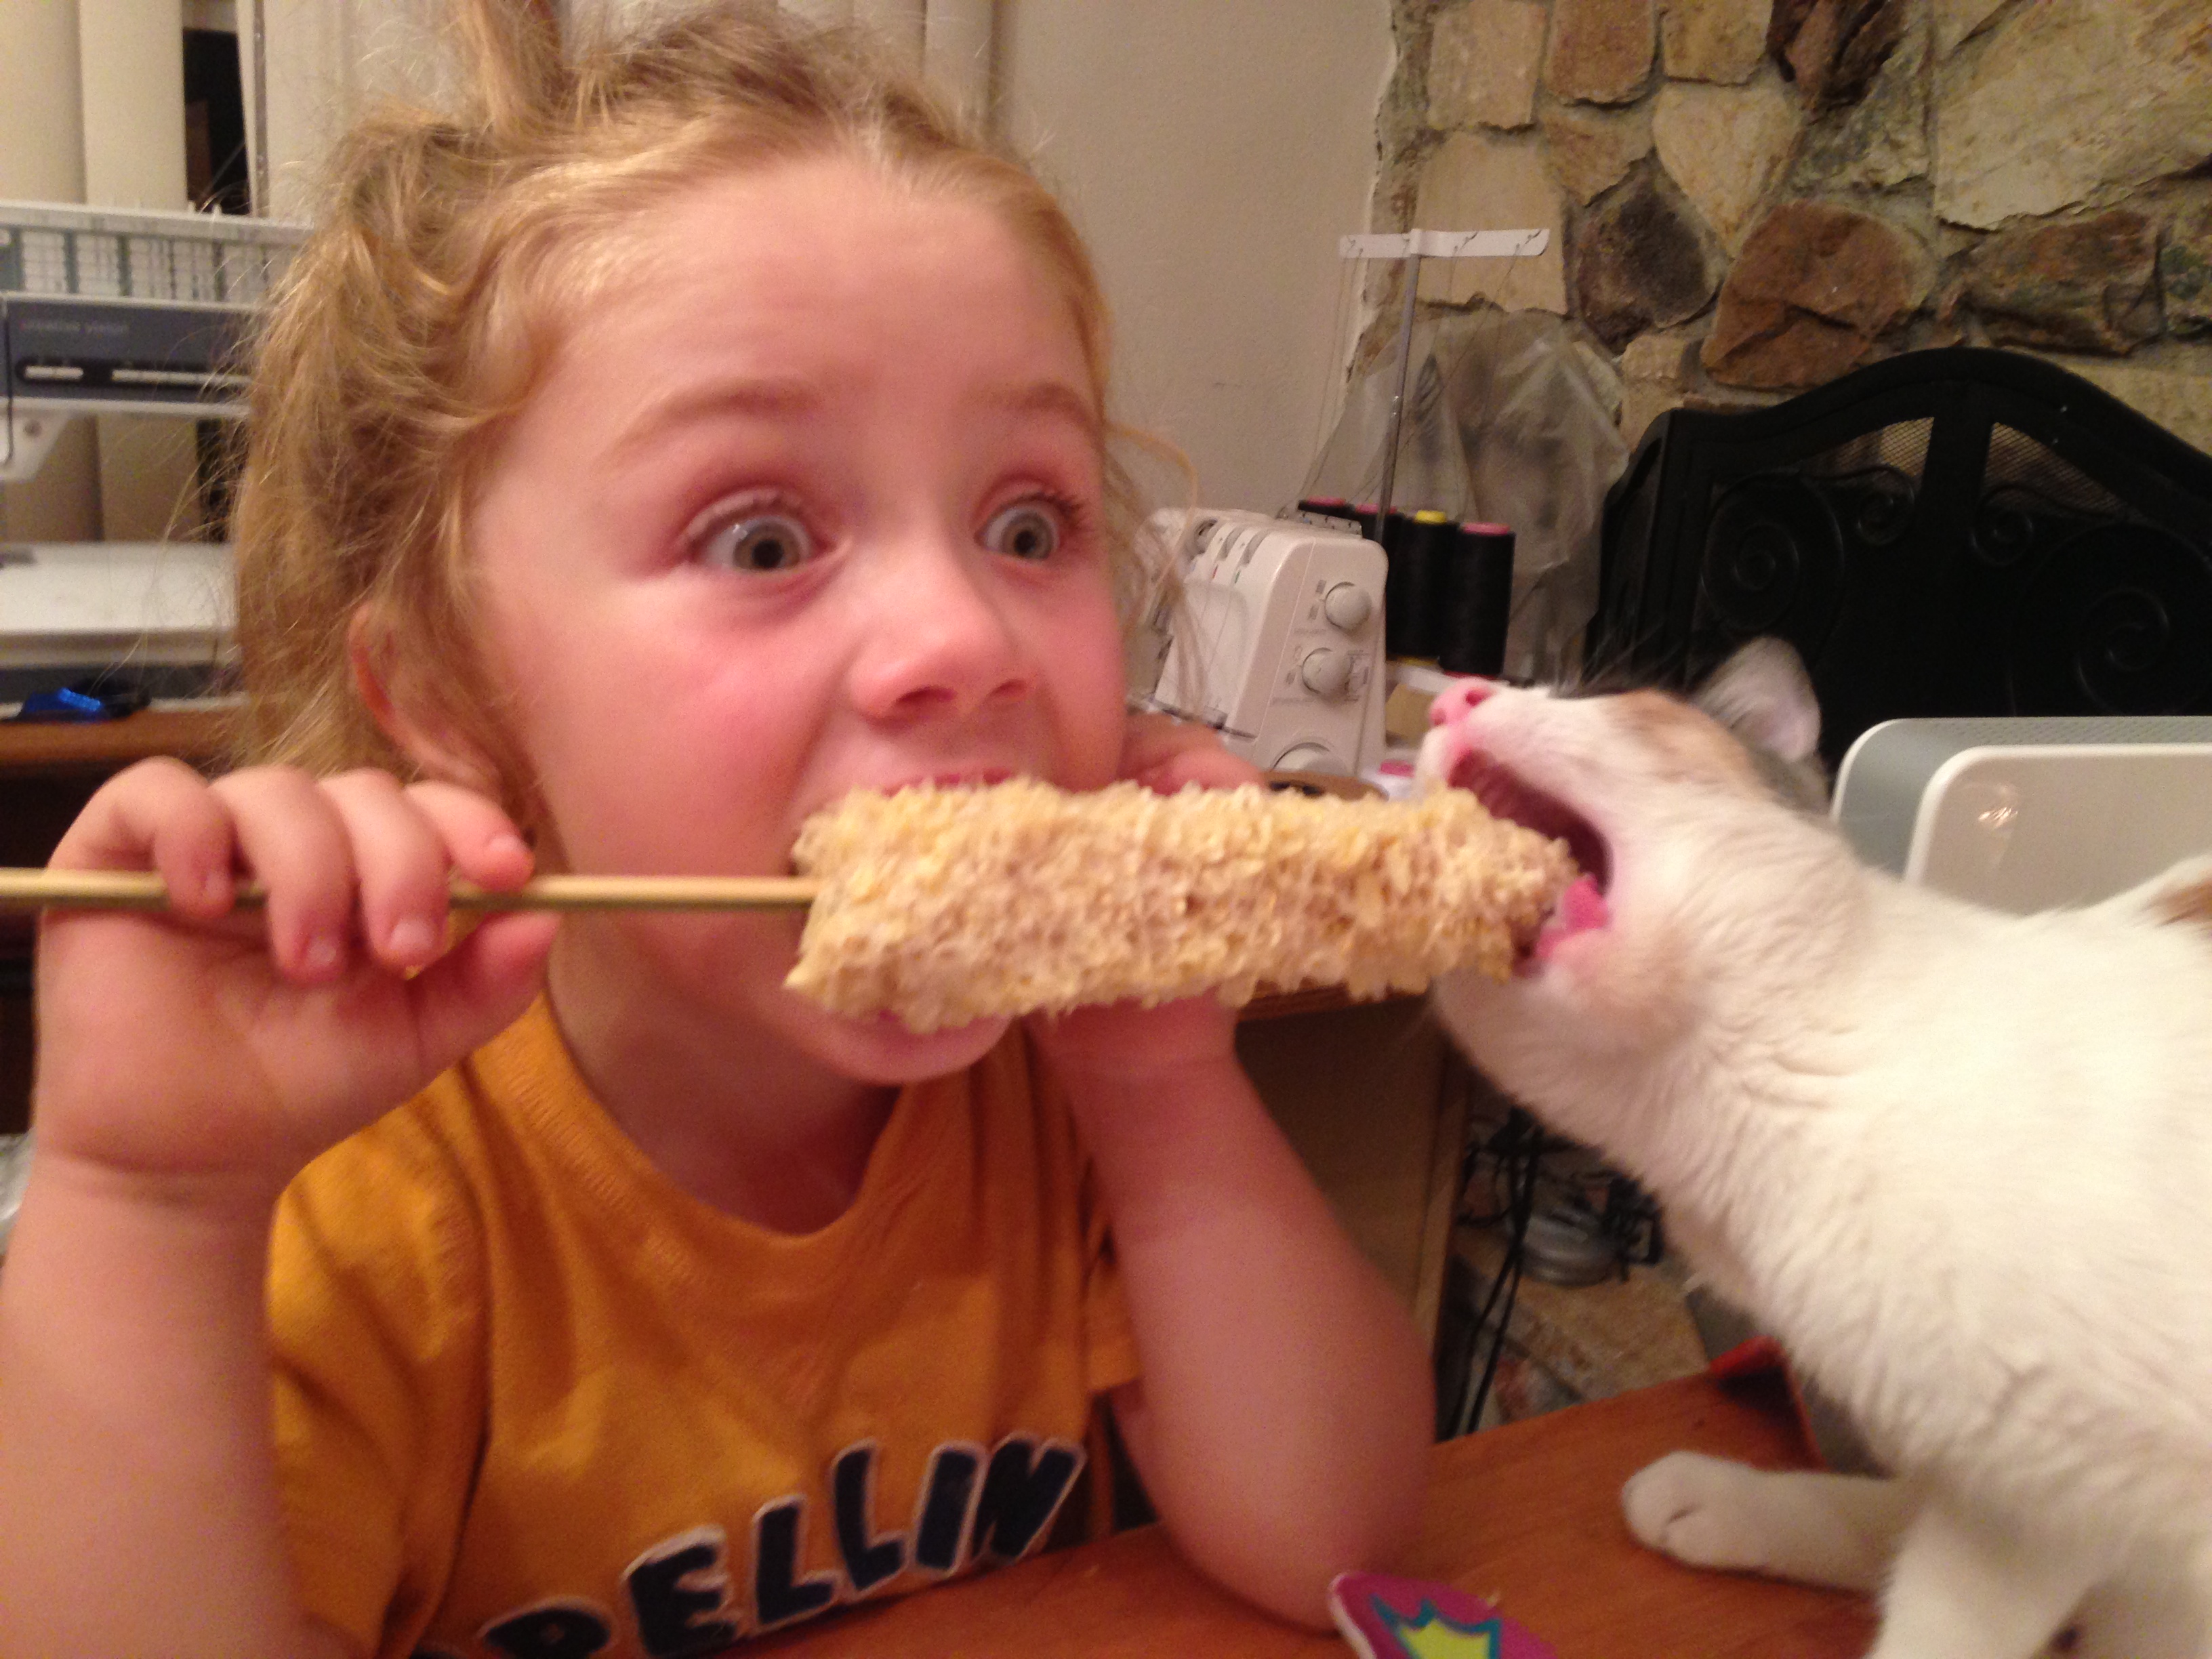 Sharing a corn. Last great moment with my Cat Squeeker, whom someone stoled shortly after we took this picture